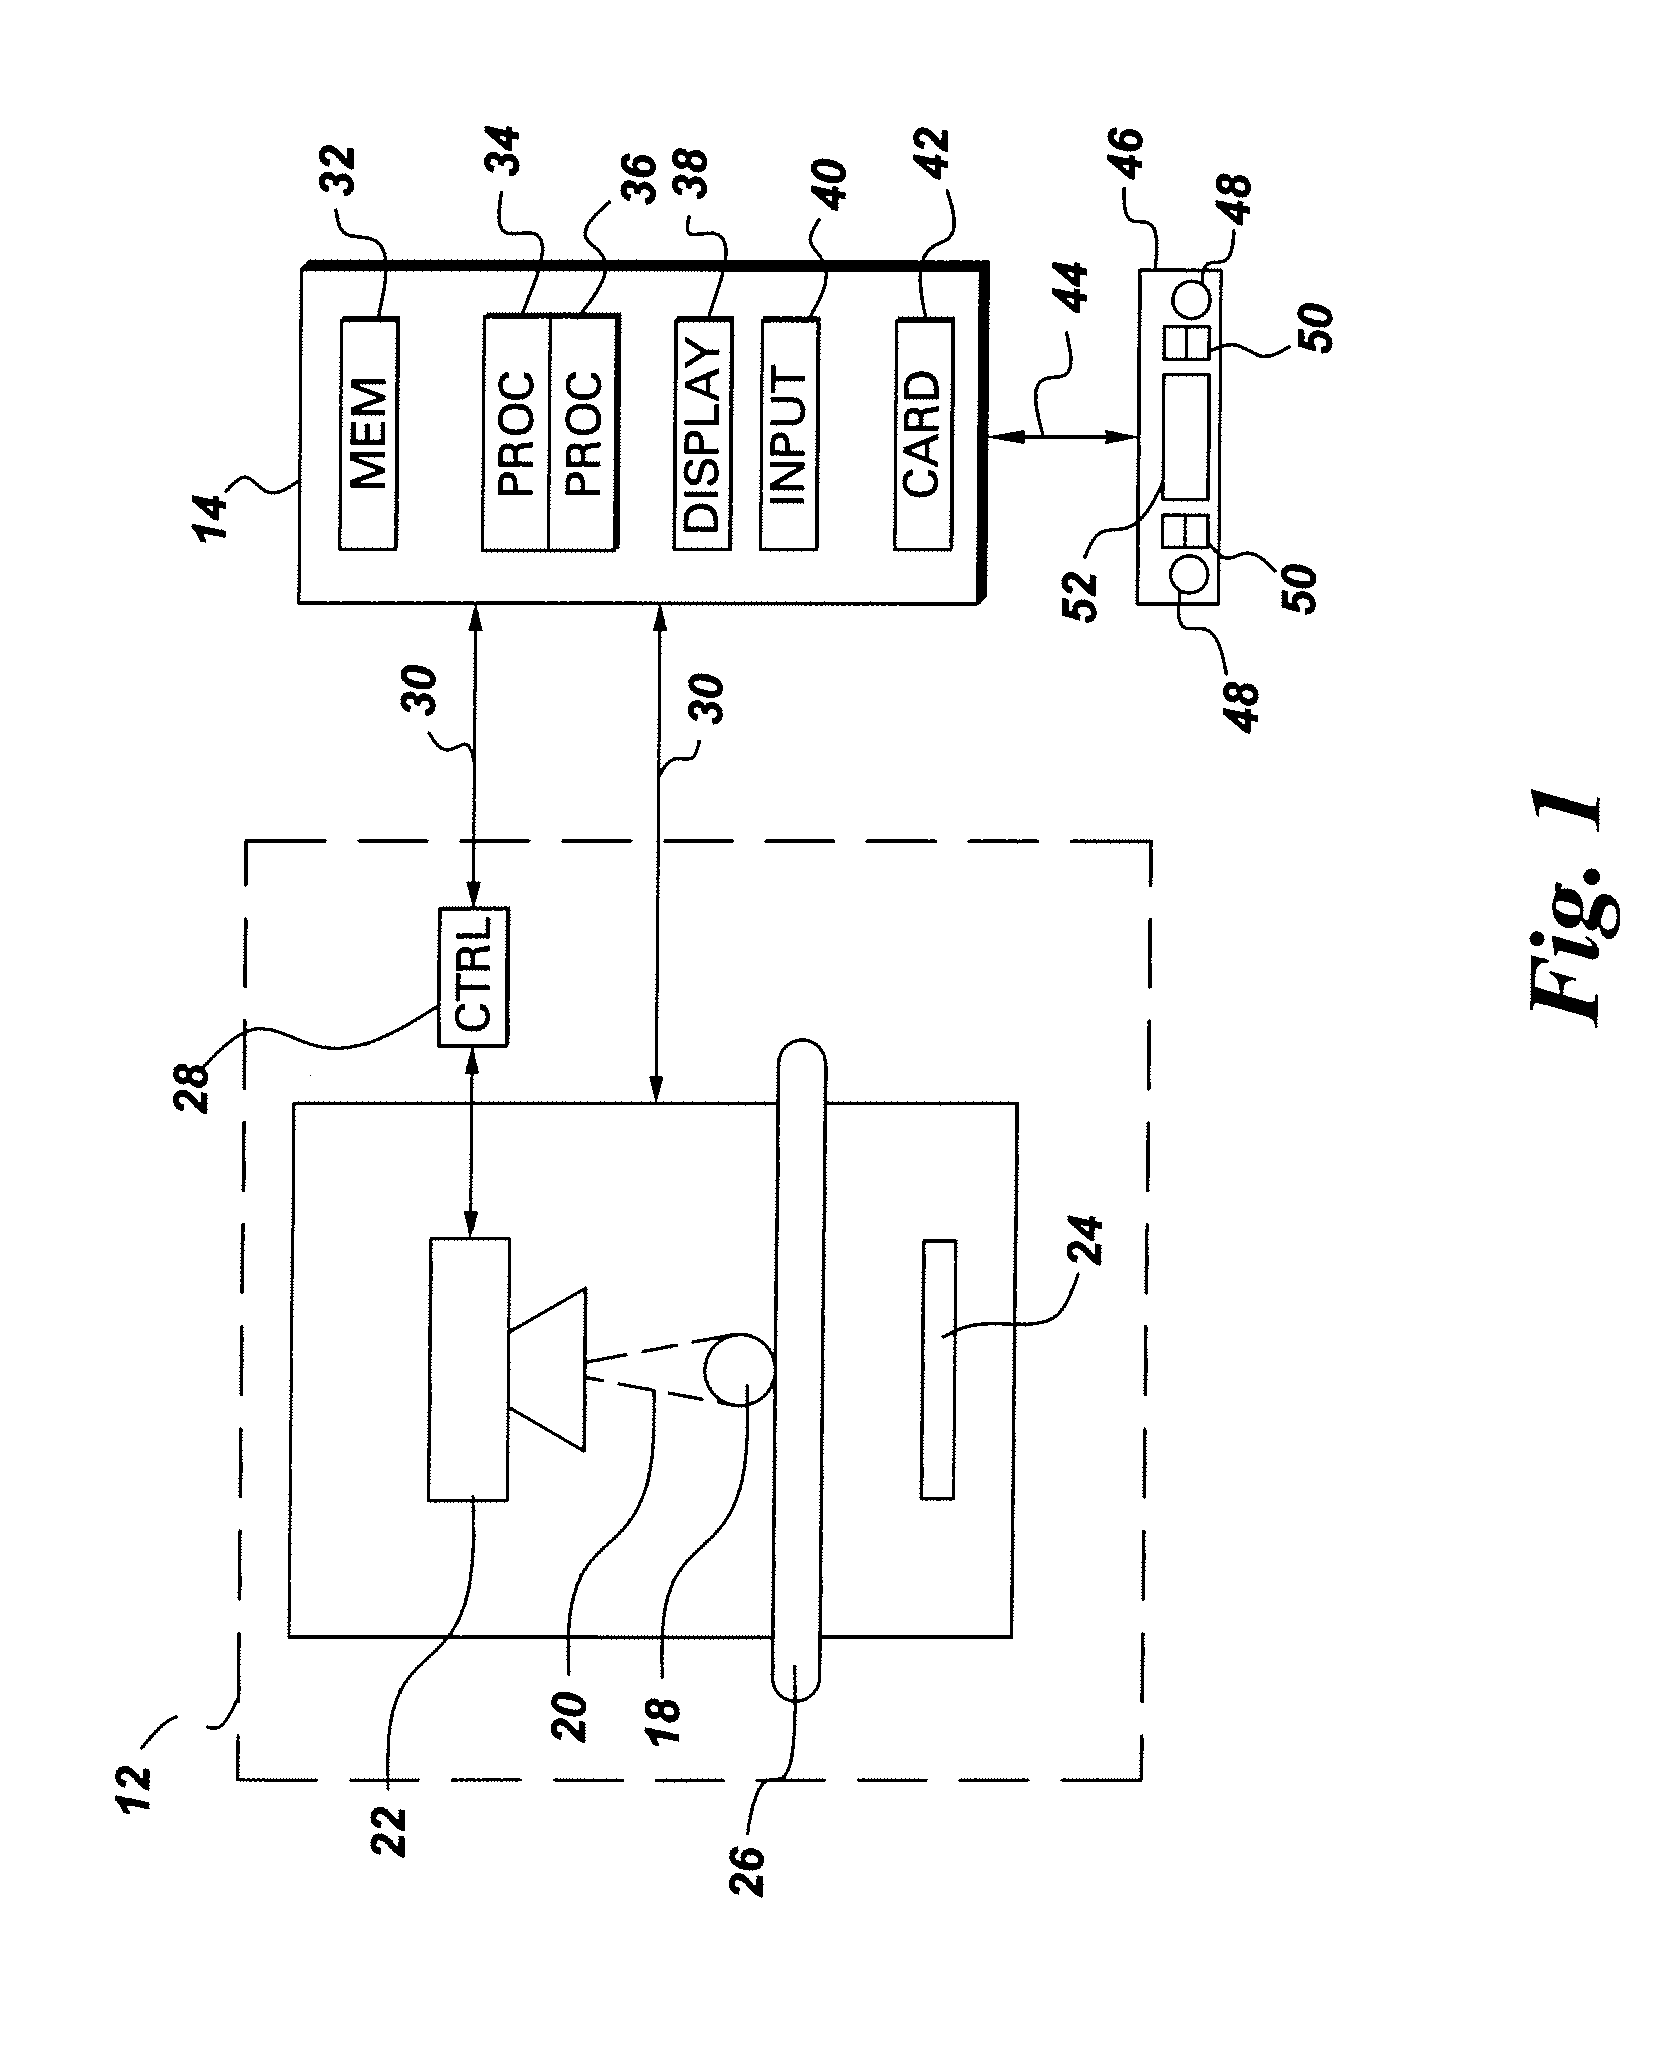 Method and System for Identifying Defects in NDT Image Data